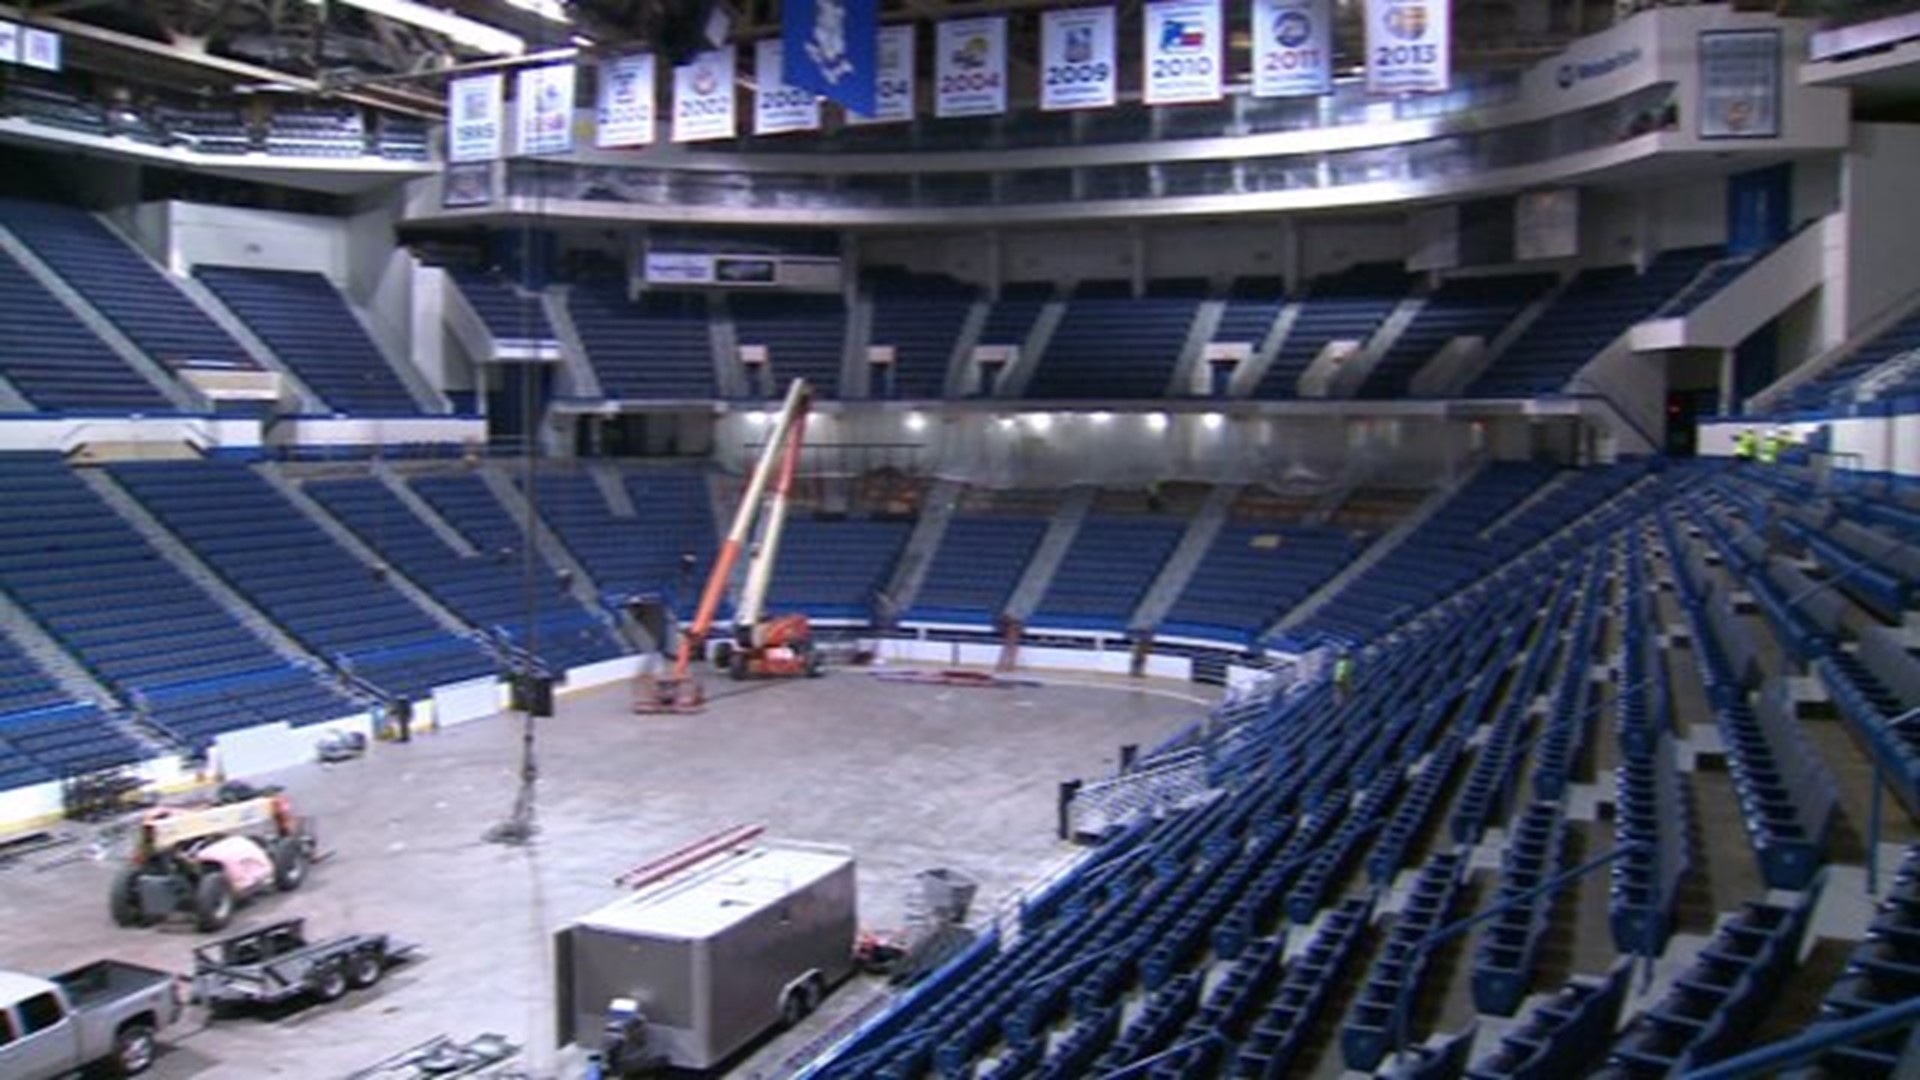 New XL Center would cost 500 million, renovated one 250 million